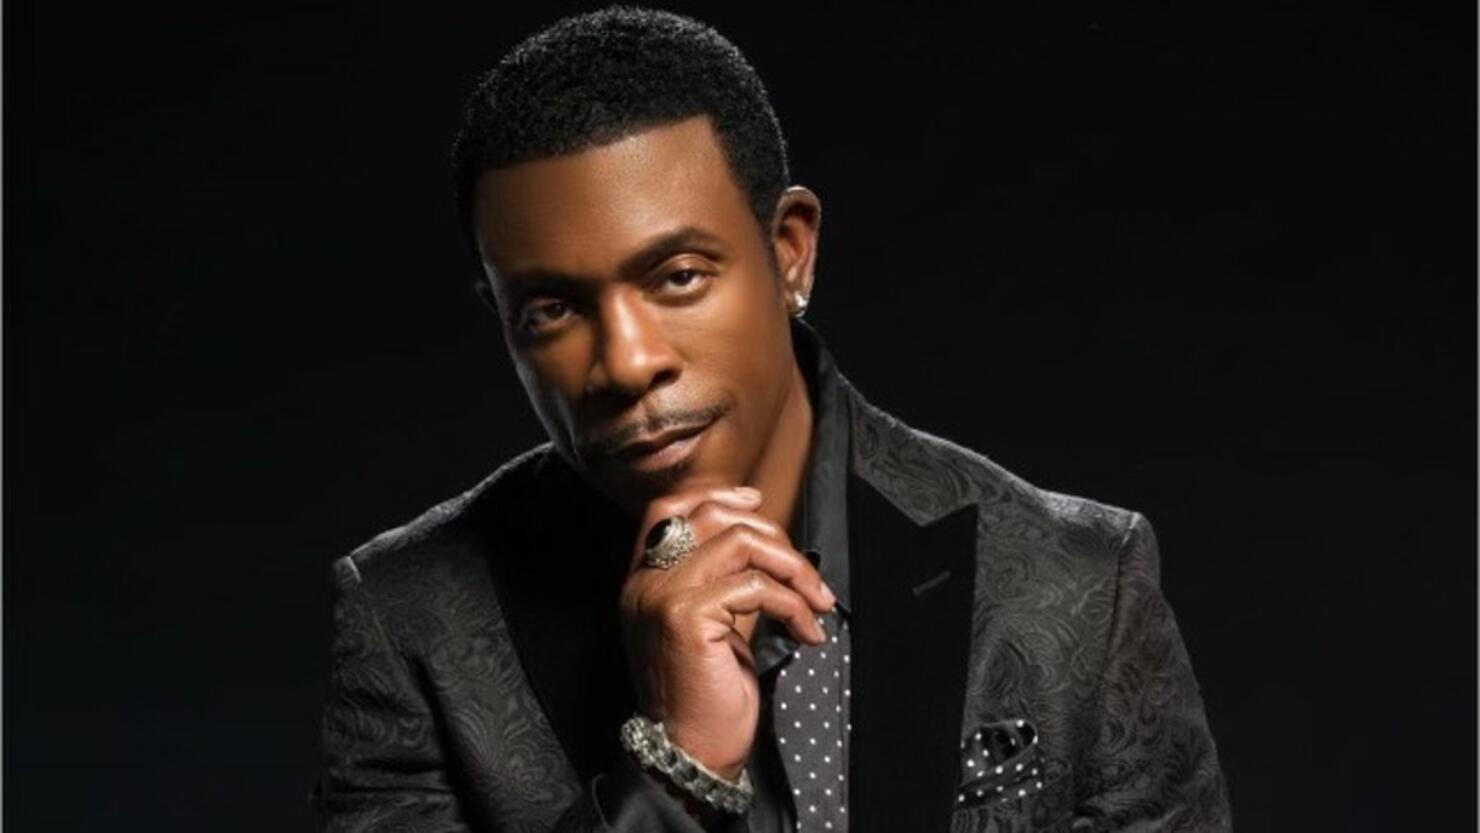 Keith Sweat Makes A Comeback With 'Can't Nobody' Featuring Raheem